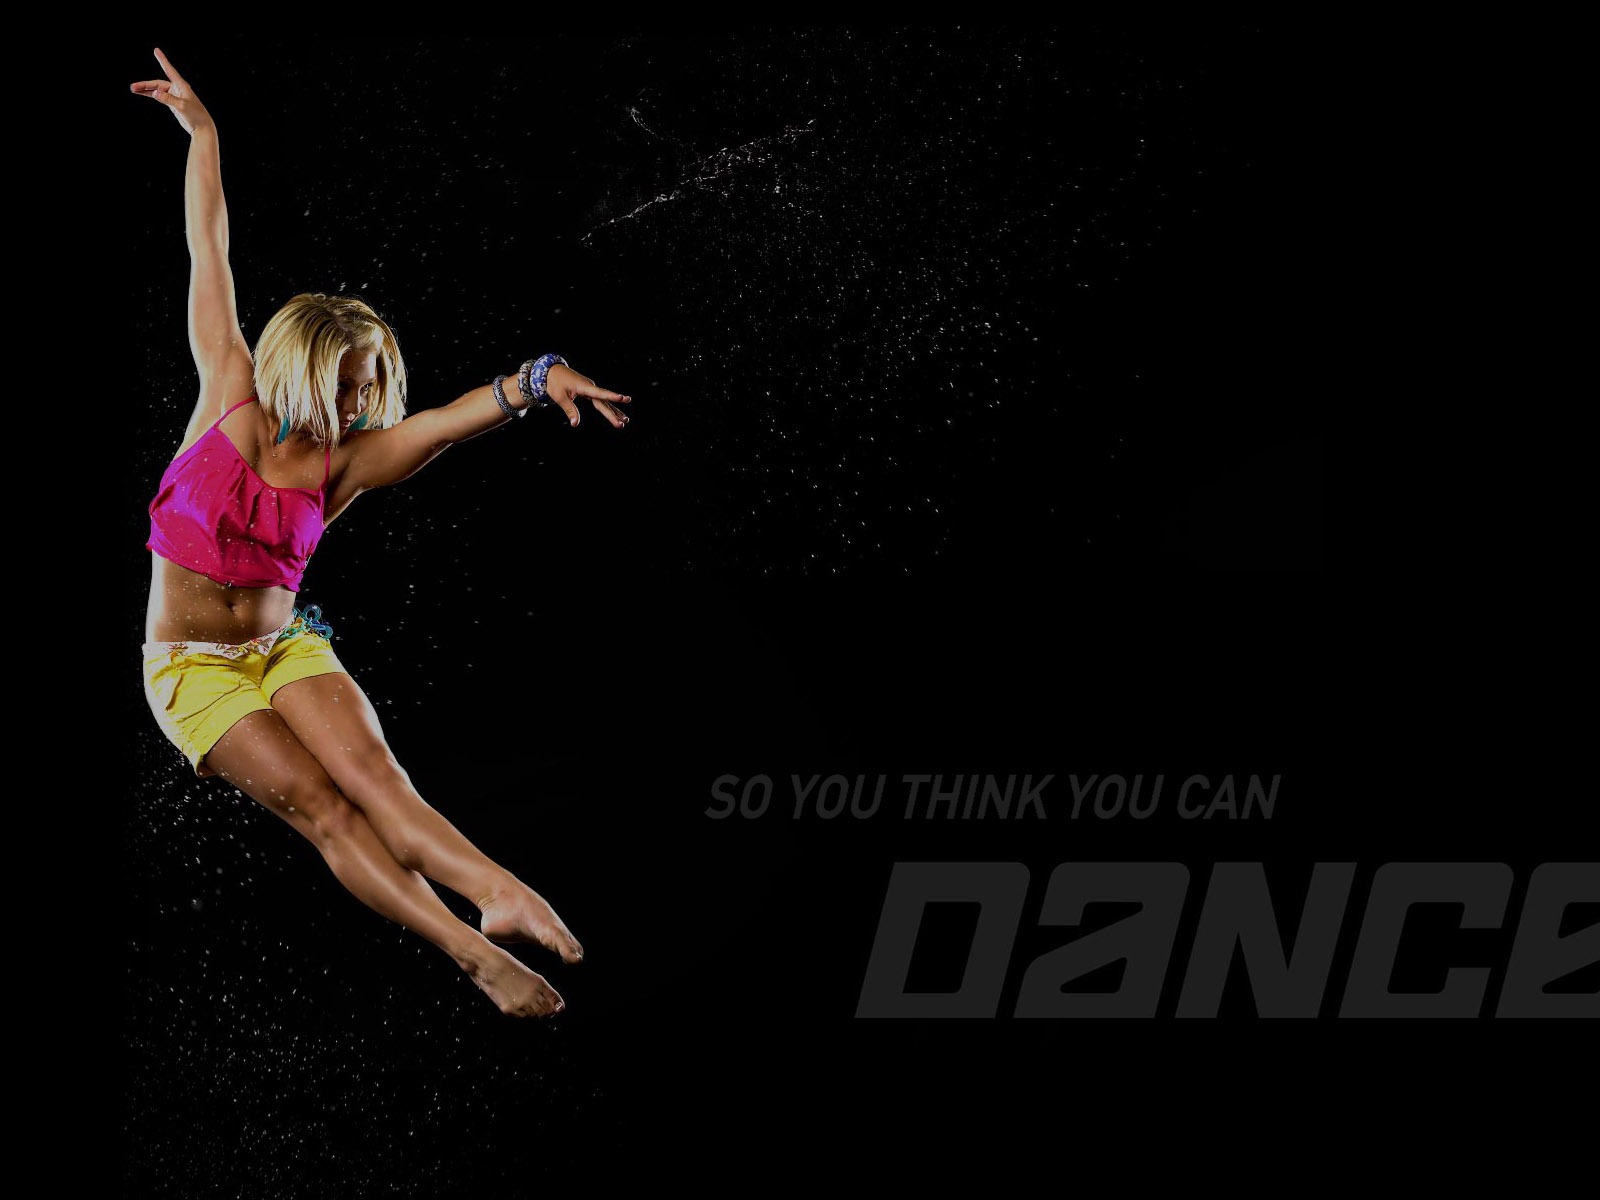 So You Think You Can Dance 舞林争霸 壁纸(一)5 - 1600x1200